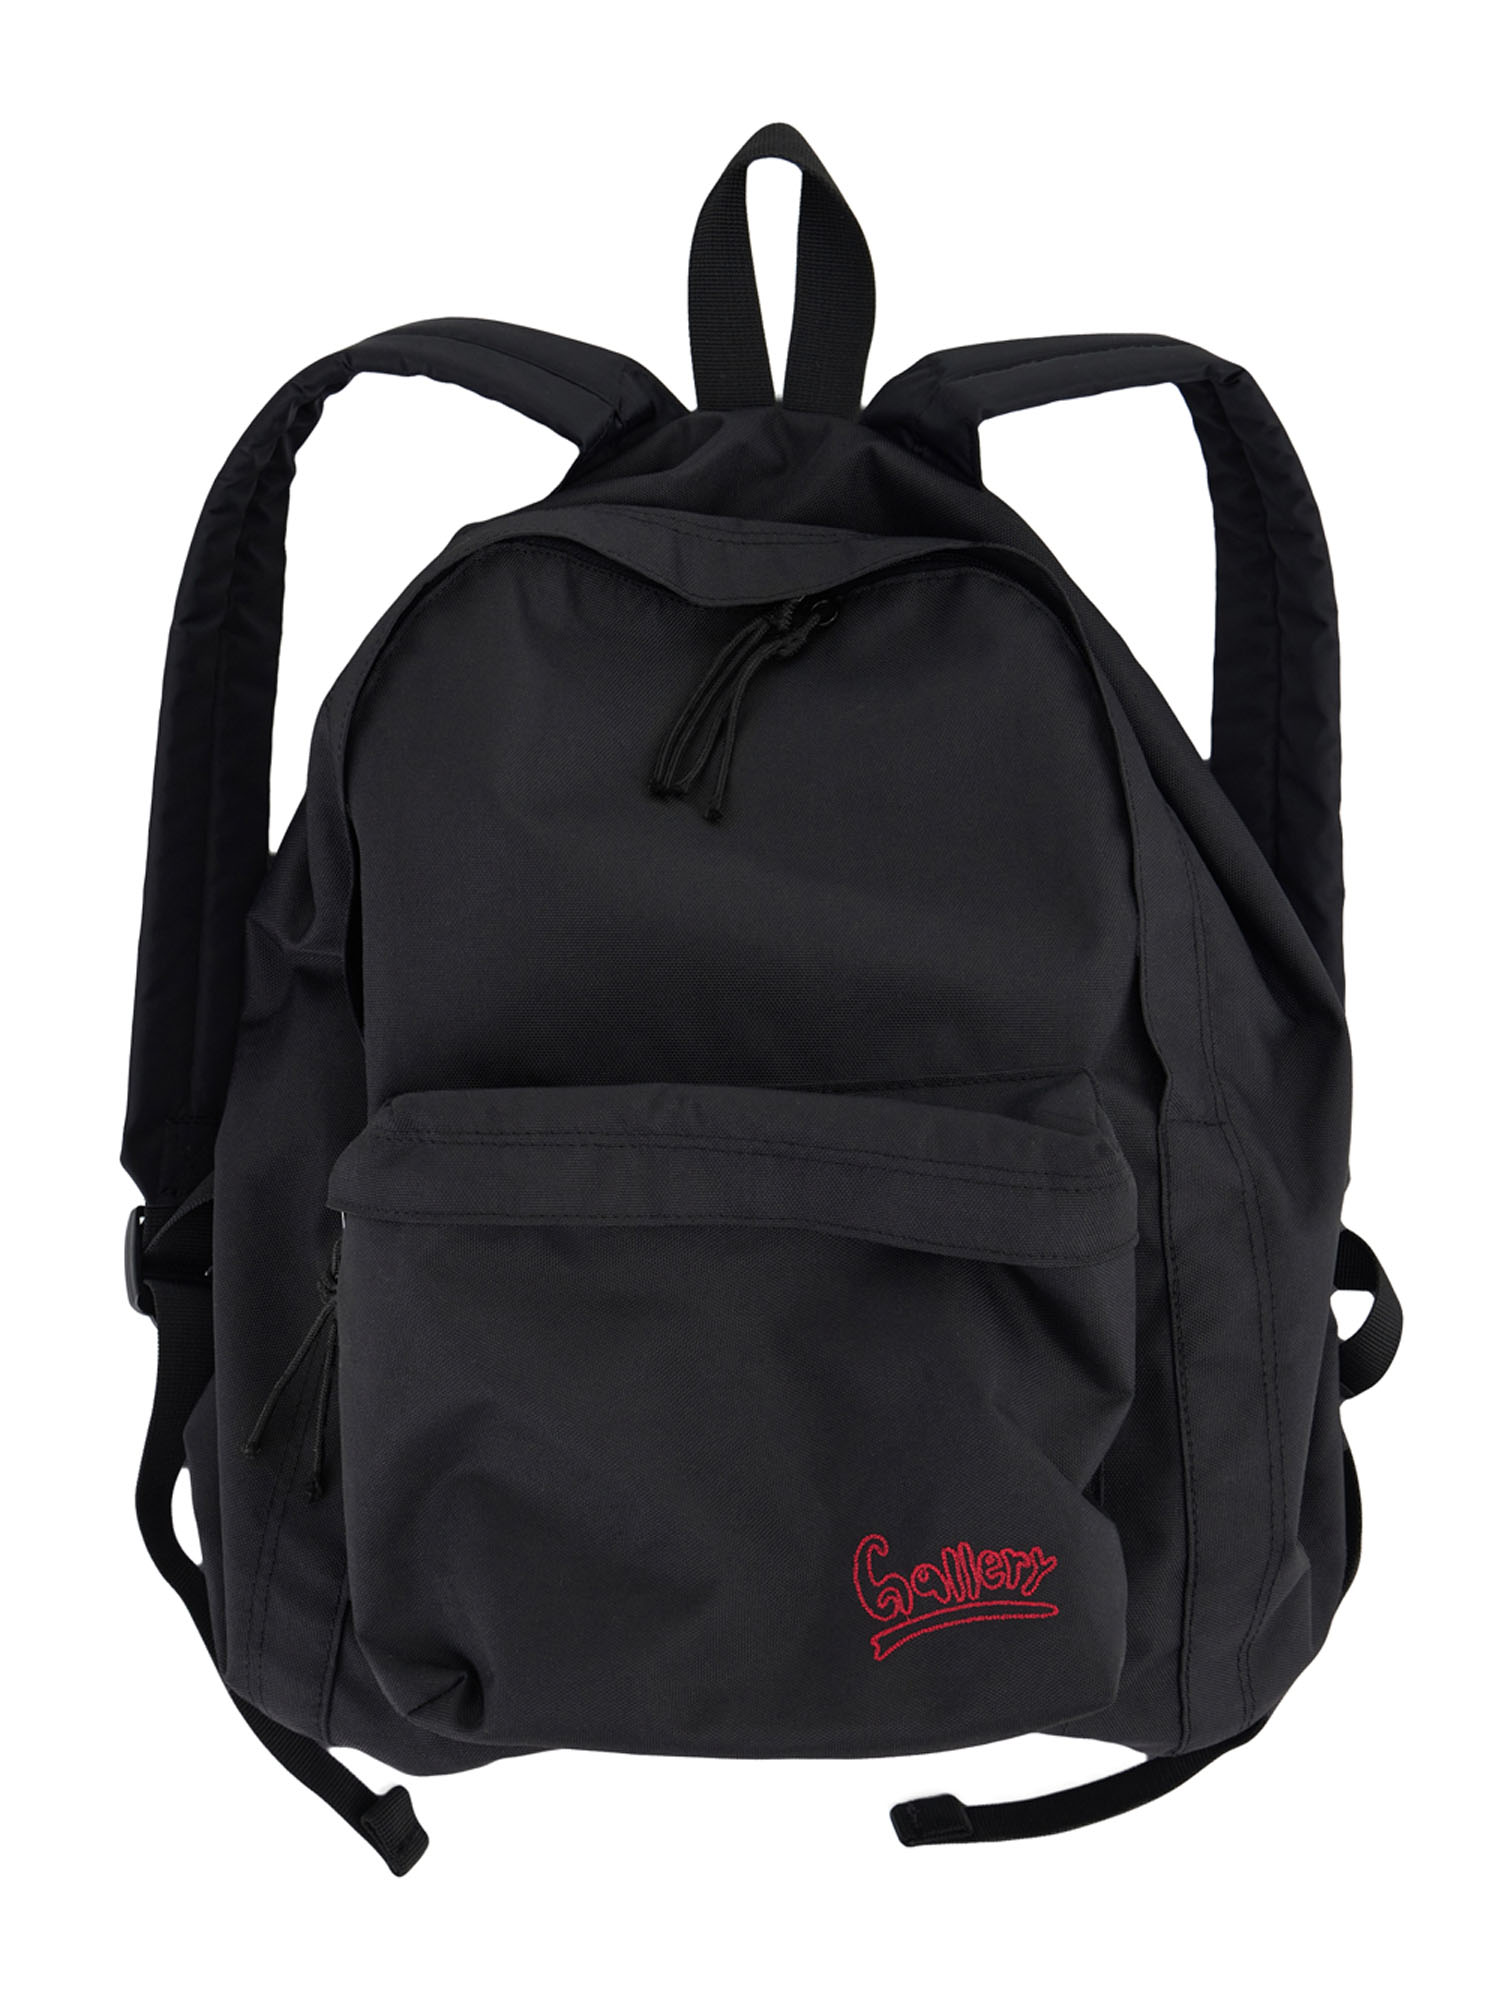 Gallery Embroidery DayPack - Black